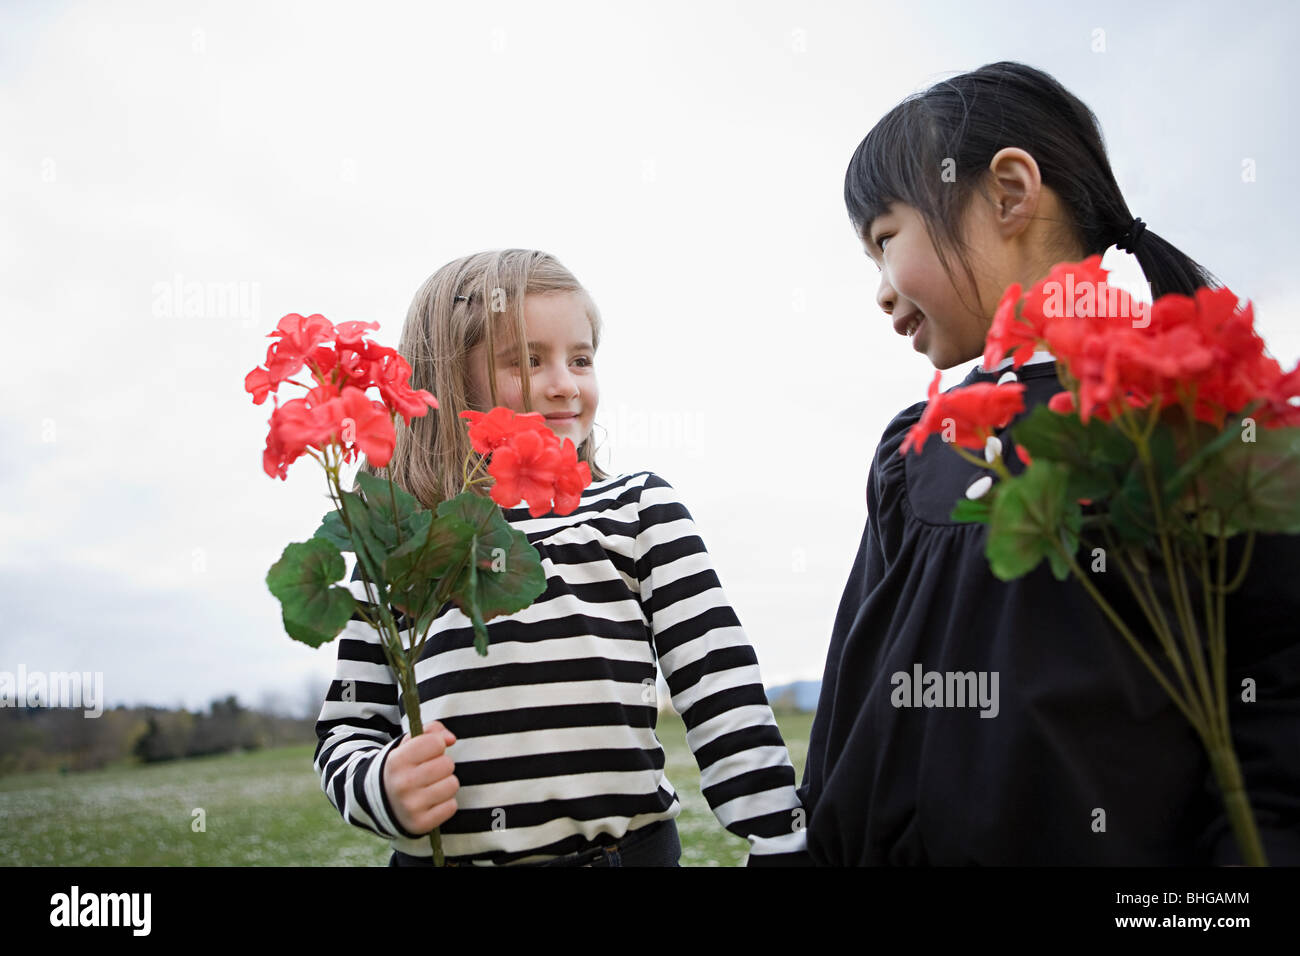 Girls holding Flowers Banque D'Images